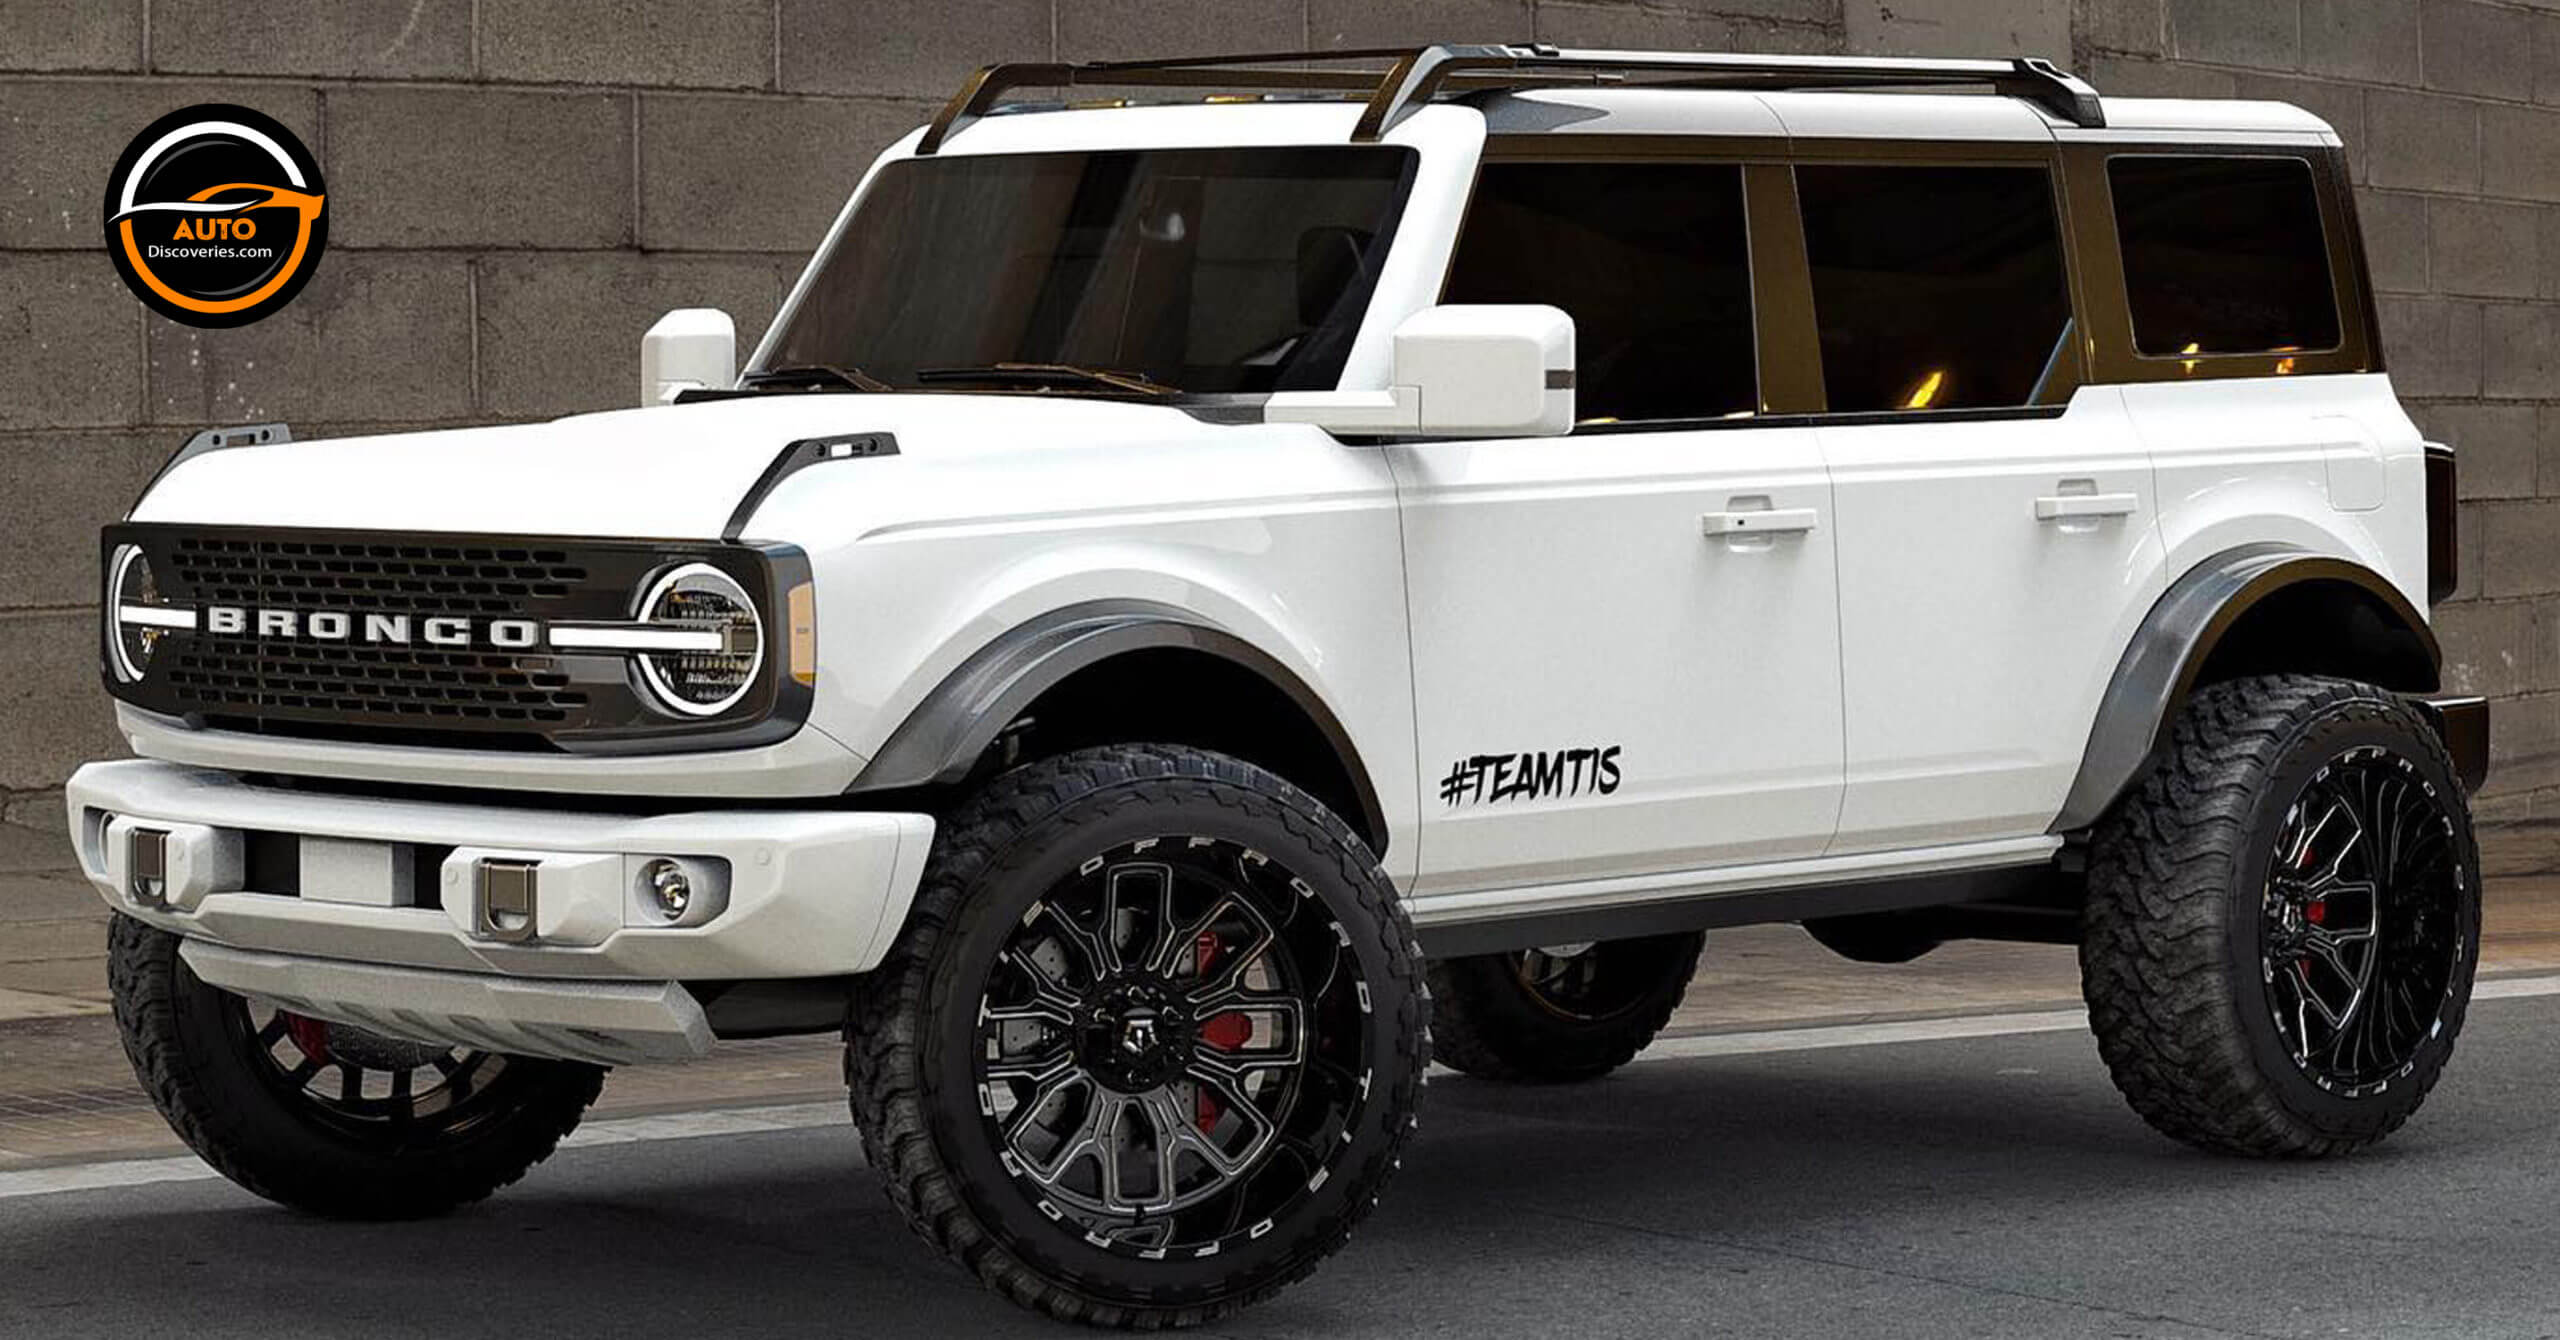 2021 Custom Ford Bronco On Some Huge TIS Wheels, BEAST Auto Discoveries